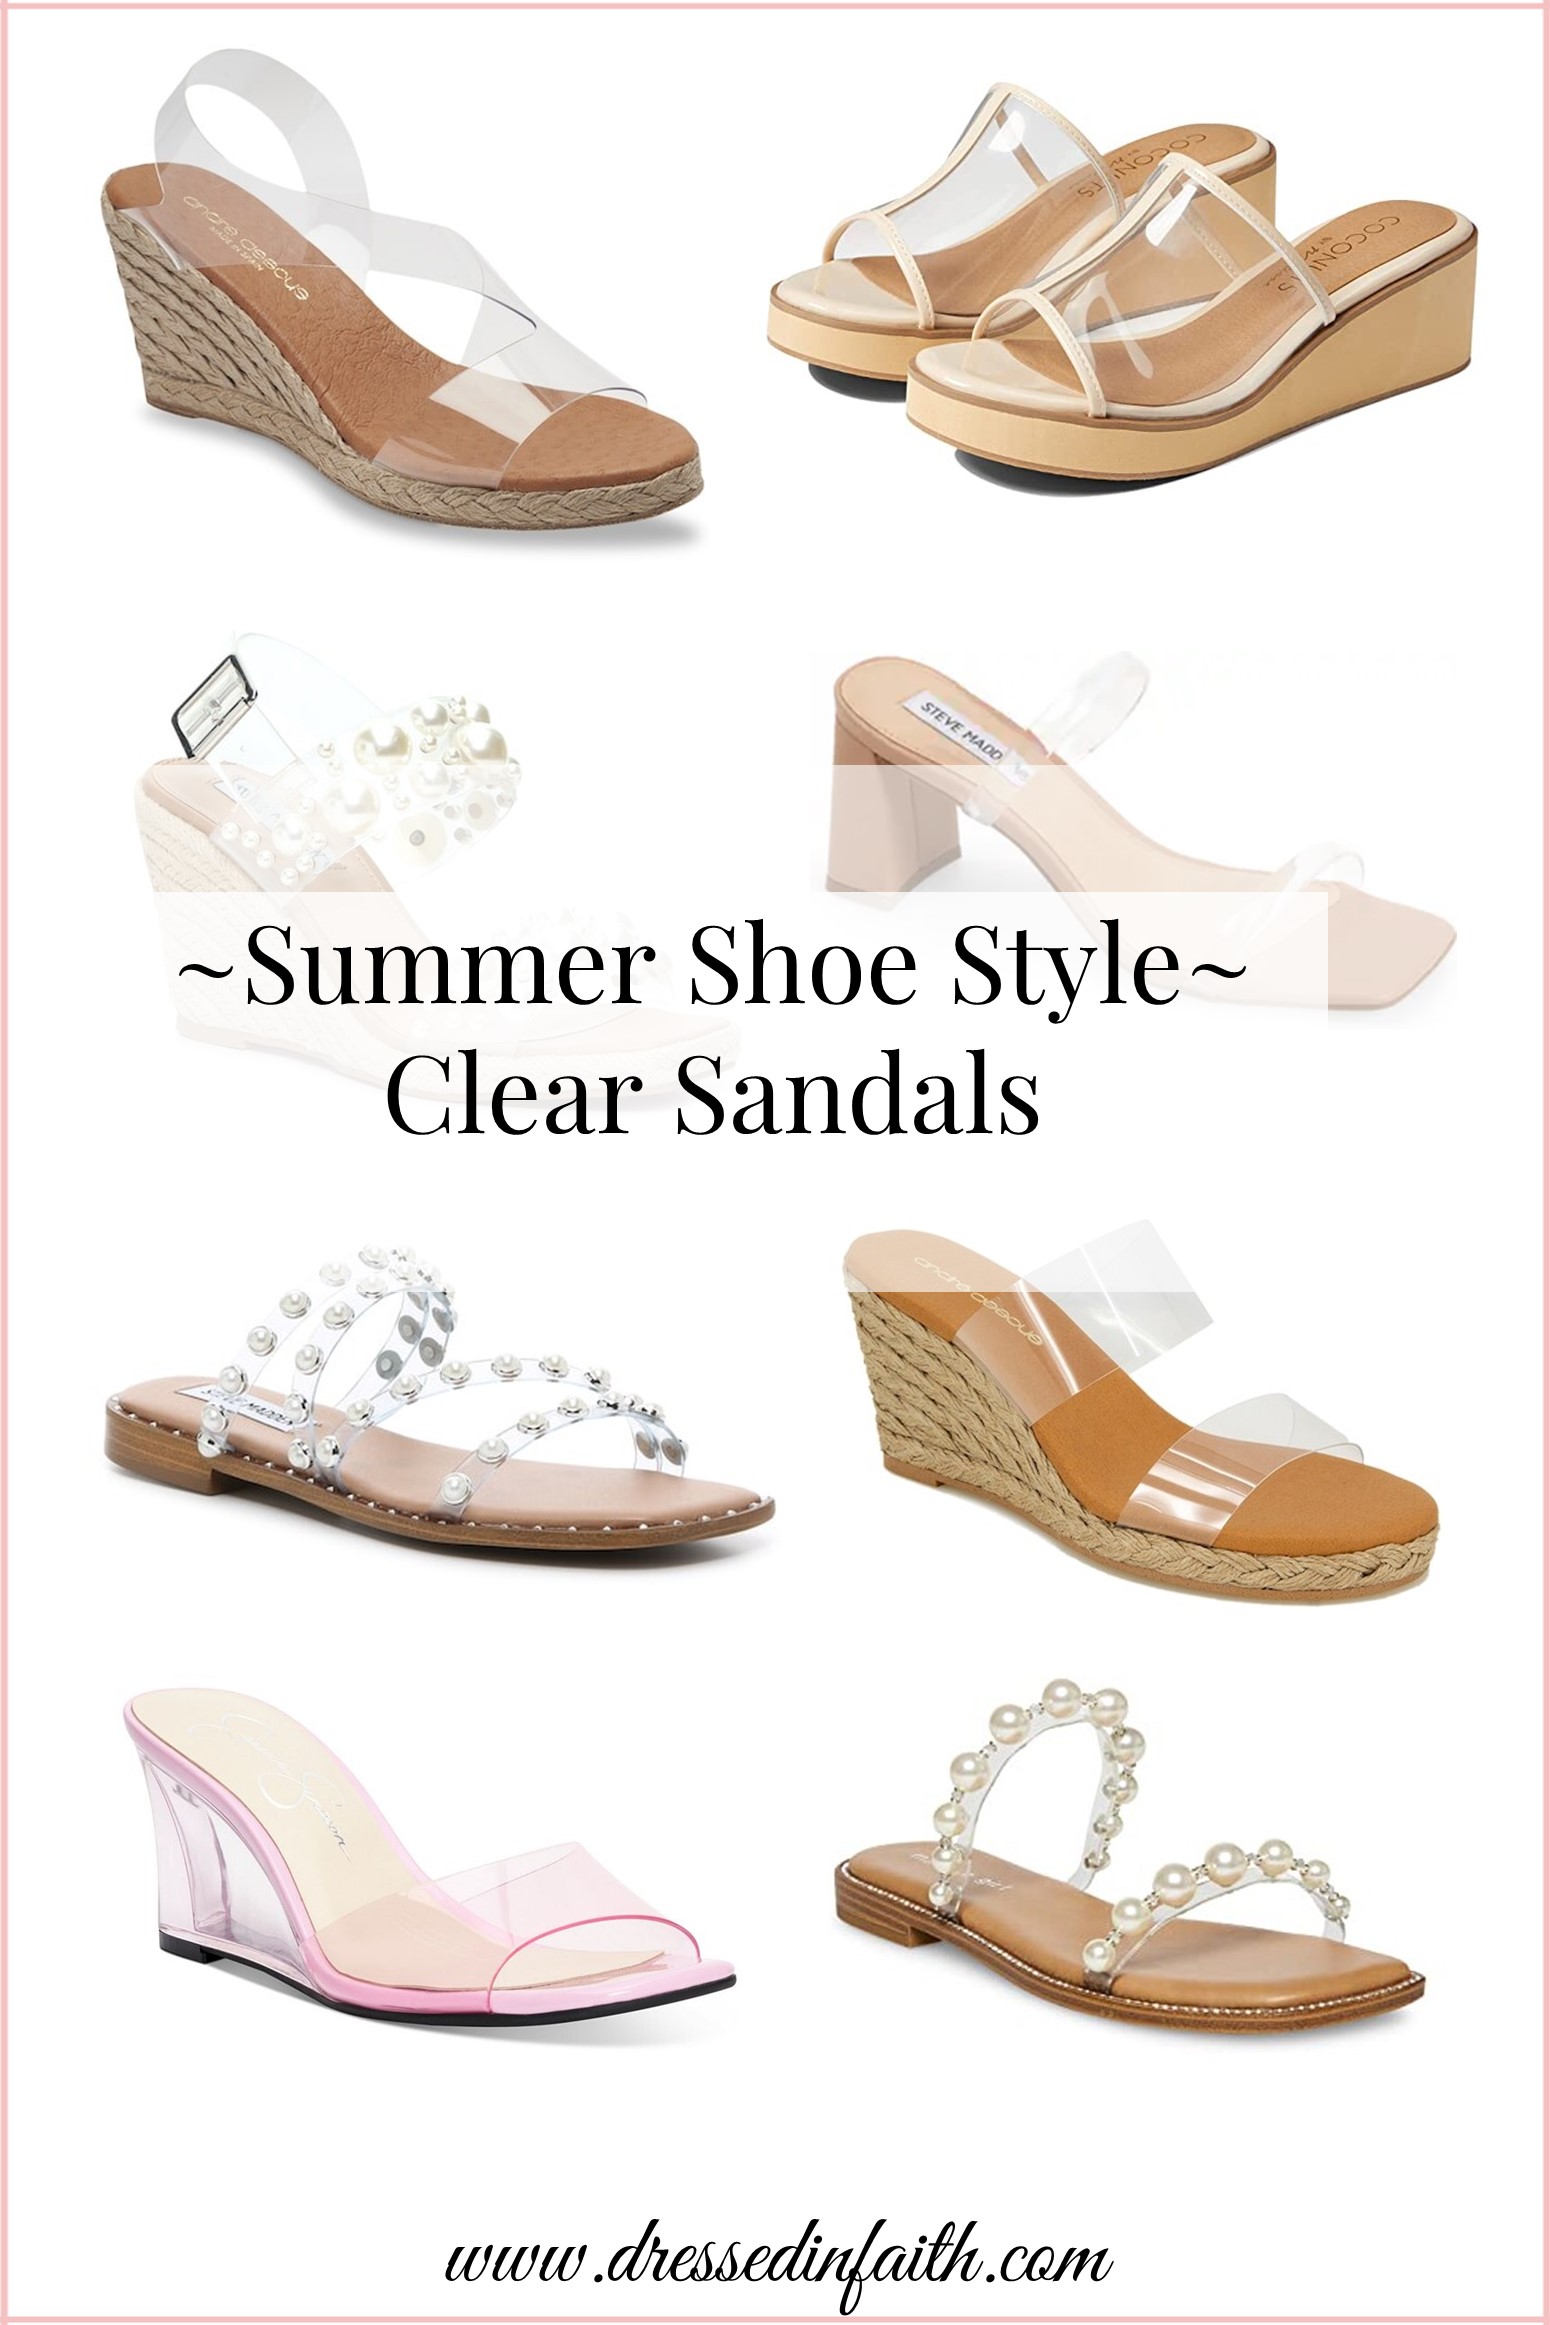 Summer Shoe Style - Clear Sandals - Dressed in Faith